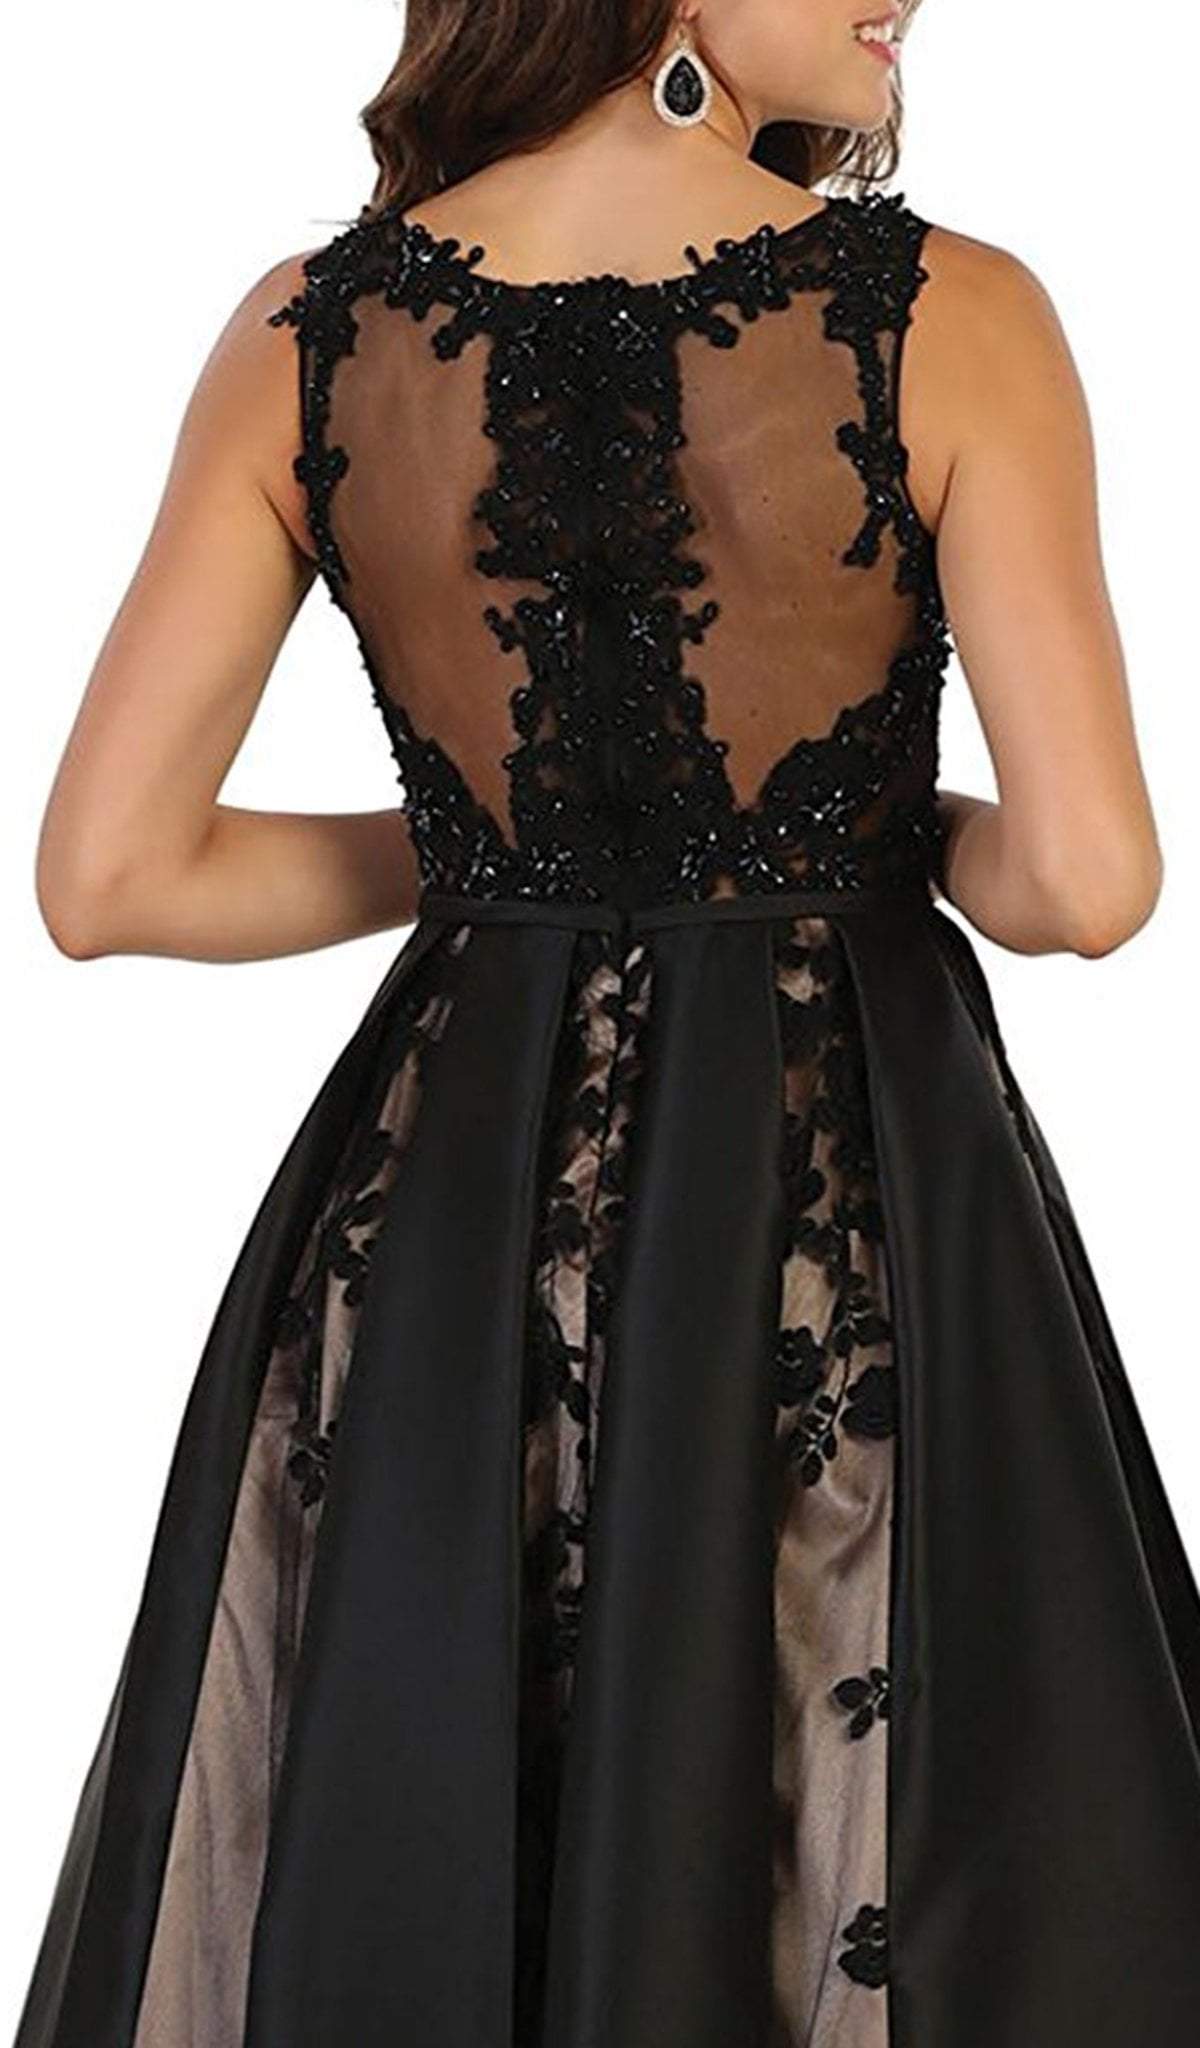 May Queen - Embroidered Sleeveless Mesh Satin Evening Gown Special Occasion Dress